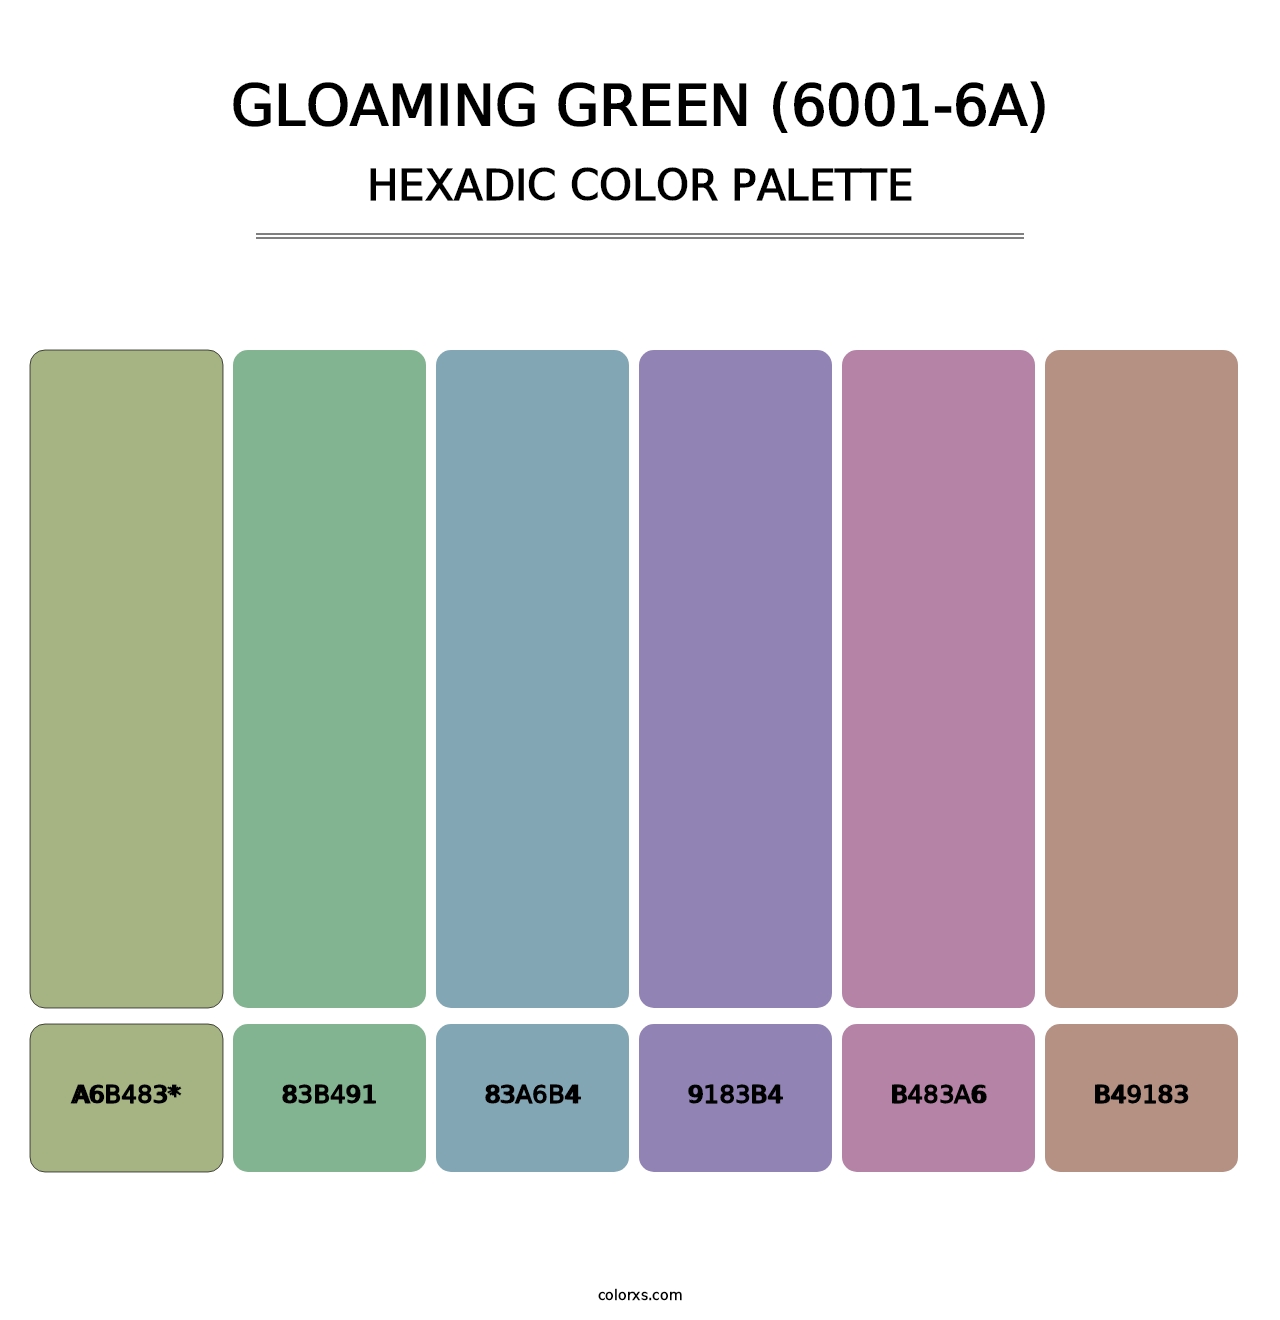 Gloaming Green (6001-6A) - Hexadic Color Palette